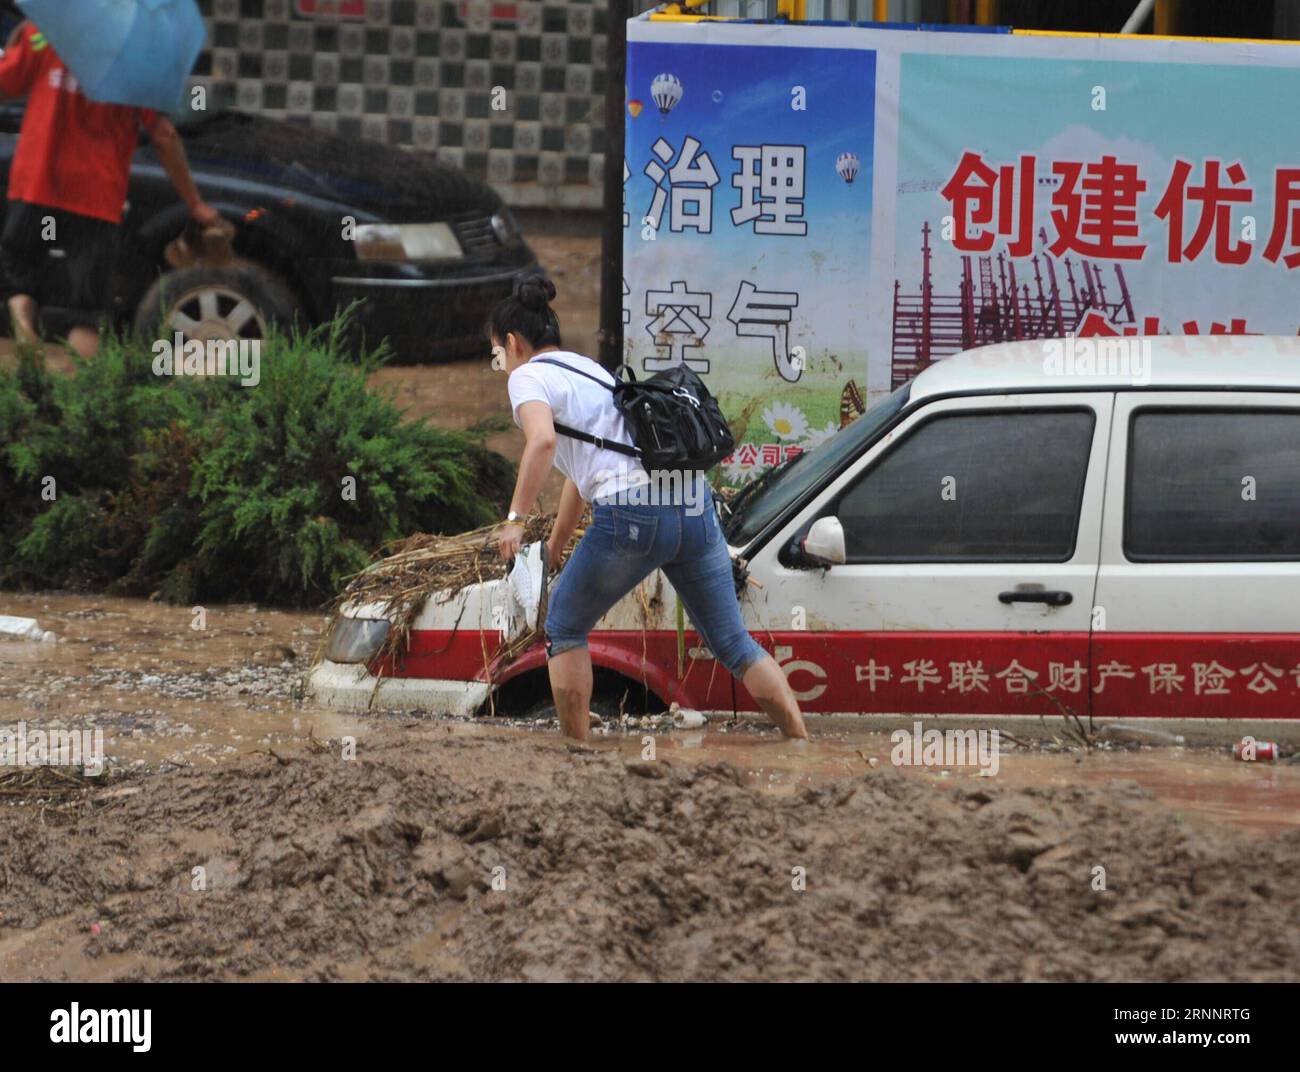 (170727) -- YULIN, July 27, 2017 -- A girl wades in the mud in Suide County of Yulin City, northwest China s Shaanxi Province, July 27, 2017. Torrential rain has battered the city of Yulin since Tuesday evening. In the worst-hit Suide and Zizhou counties, precipitation from 8 a.m. Tuesday to 7 a.m. Wednesday exceeded 200 millimeters, according to the provincial flood control headquarters. ) (zx) CHINA-SHAANXI-FLOODS (CN) ZhangxBowen PUBLICATIONxNOTxINxCHN   Yulin July 27 2017 a Girl Wade in The Mud in suide County of Yulin City Northwest China S Shaanxi Province July 27 2017 torrential Rain ha Stock Photo